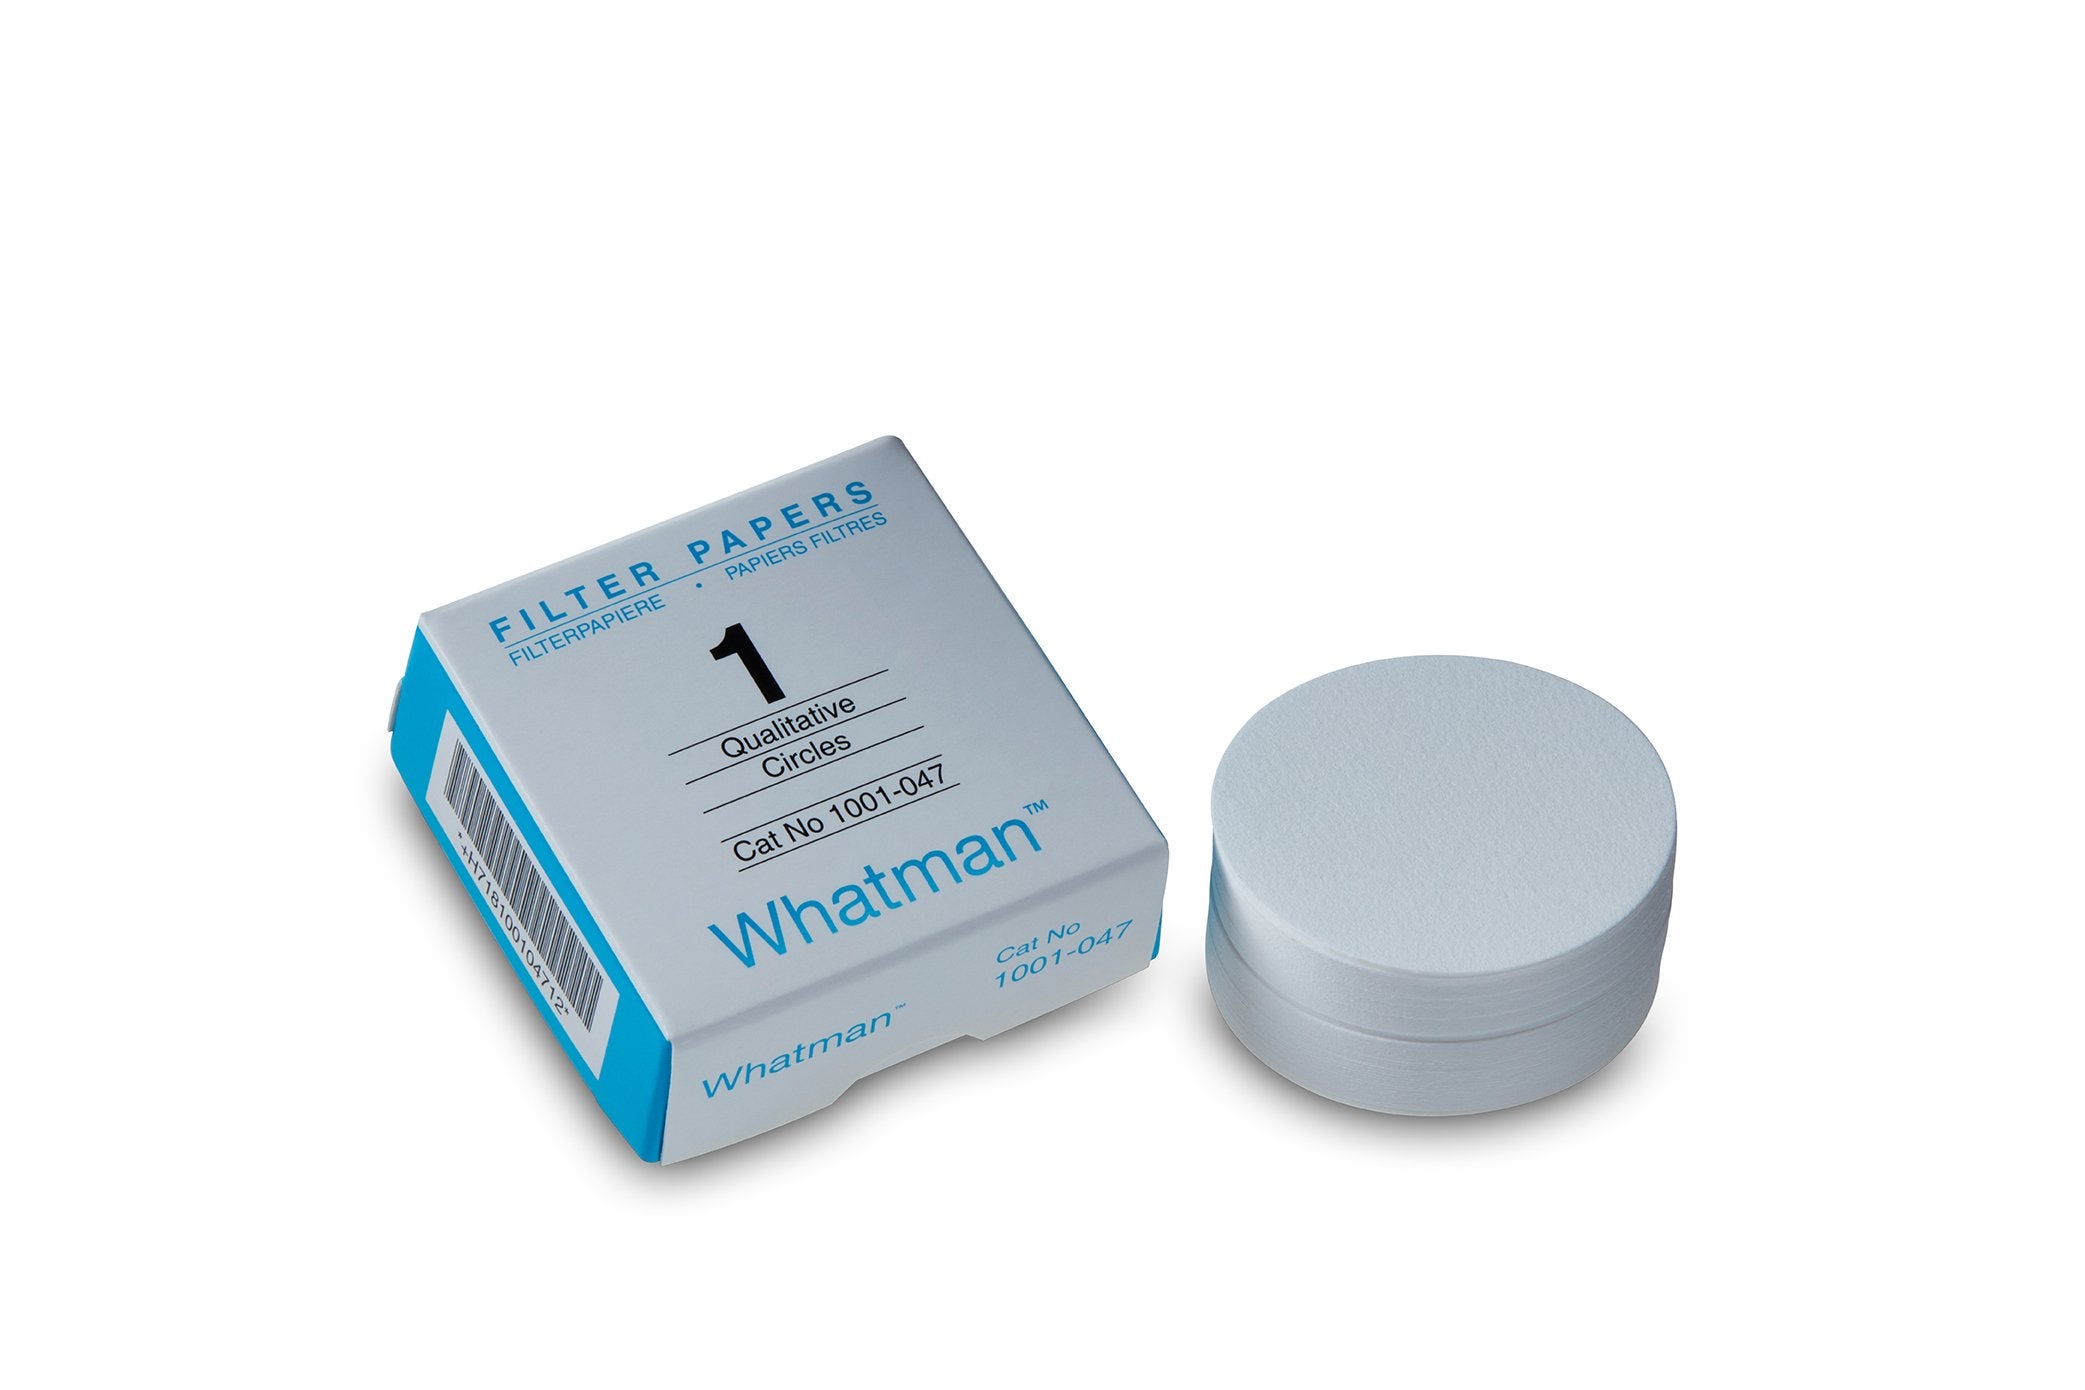 Whatman 3001-651 Cellulose Chromatography Paper Grade 1 , roll, 1.5 inches × 300 ft, 1 Piece